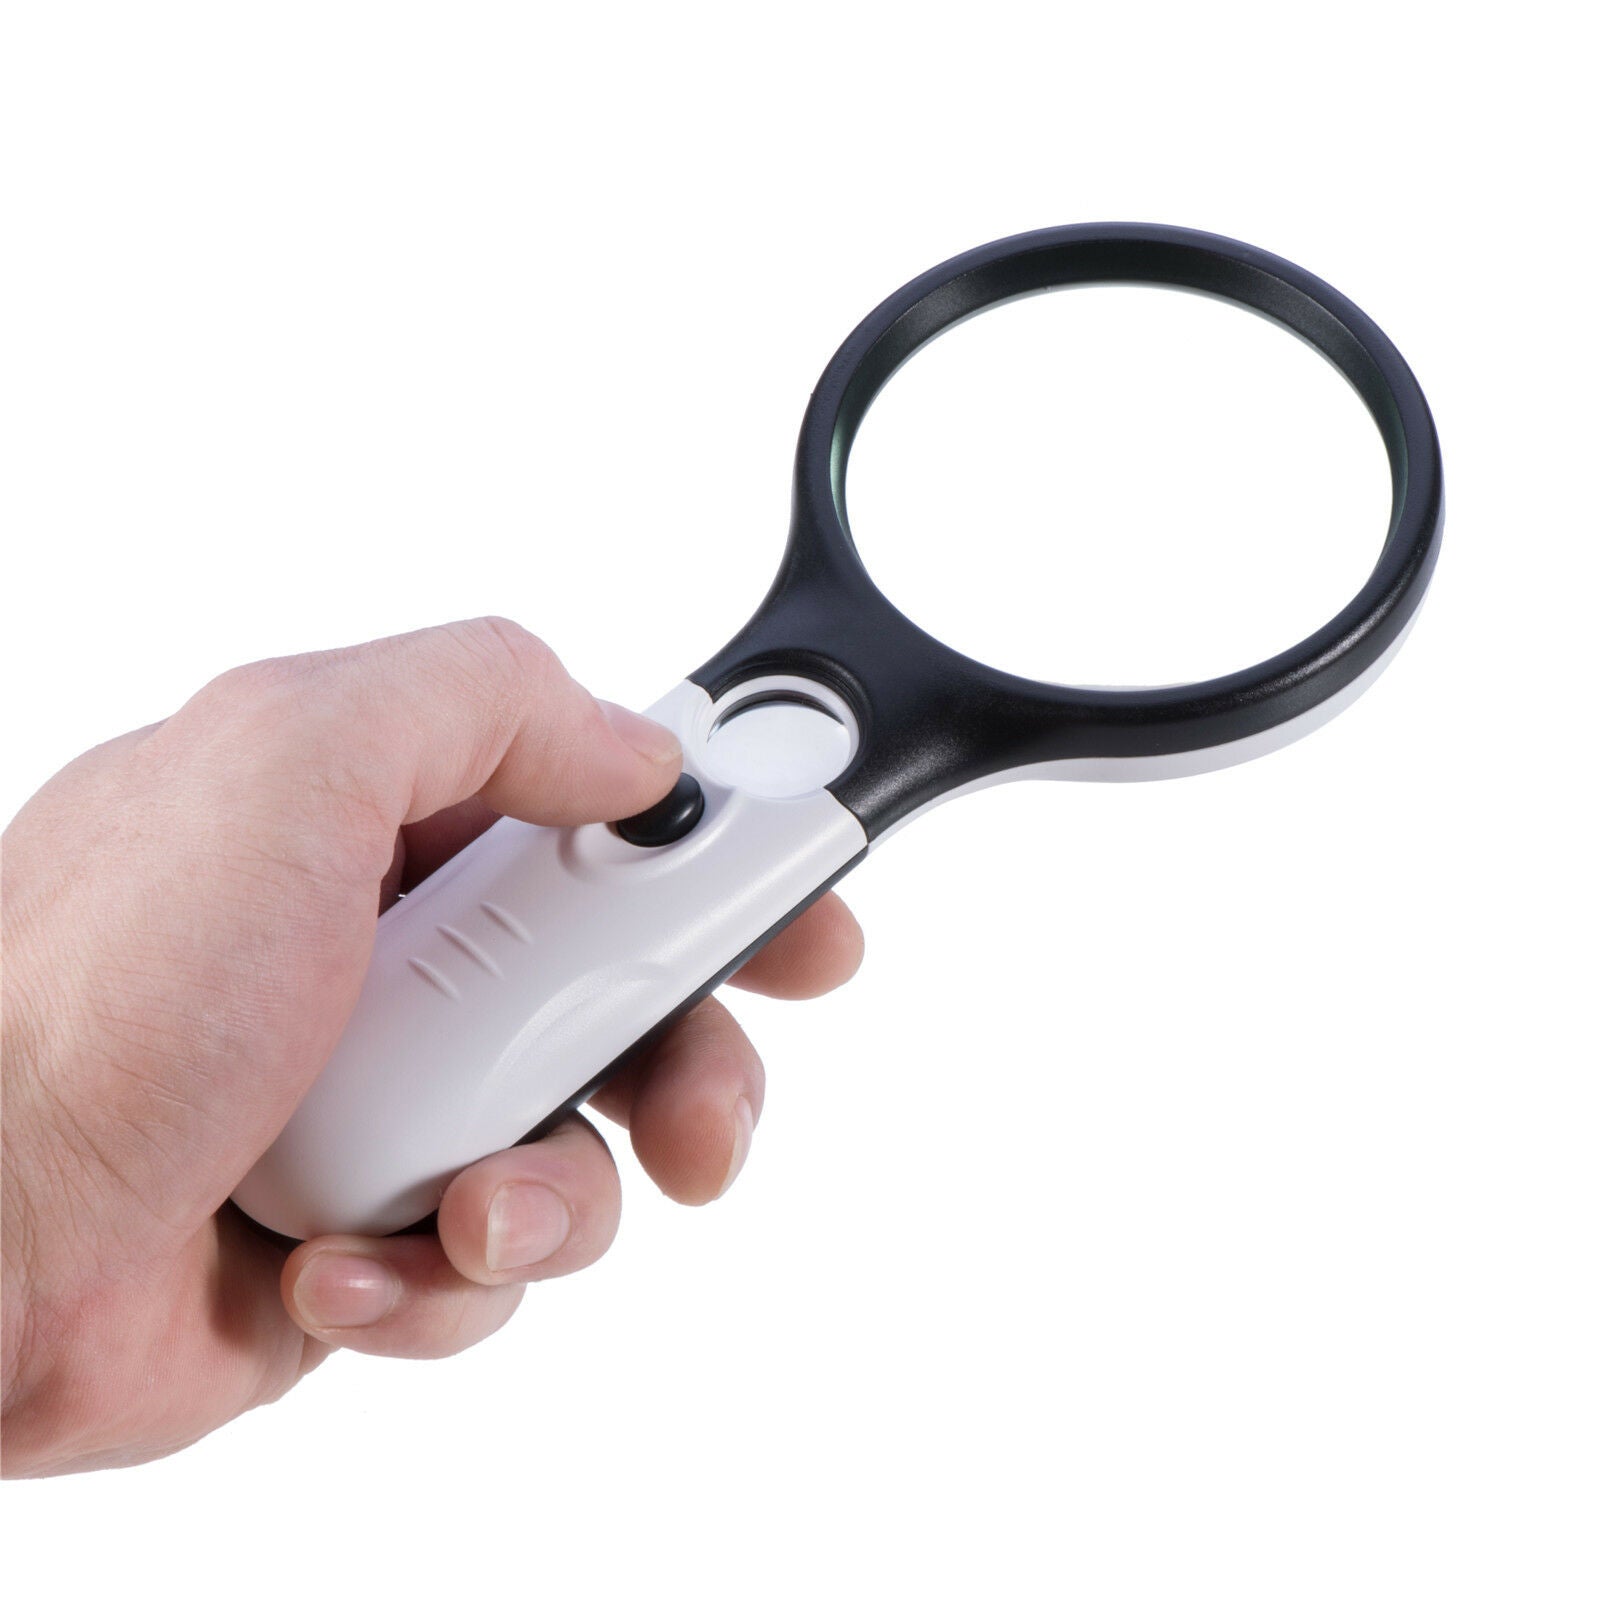 Jewelers Type 3 Led Light Magnifying Glass